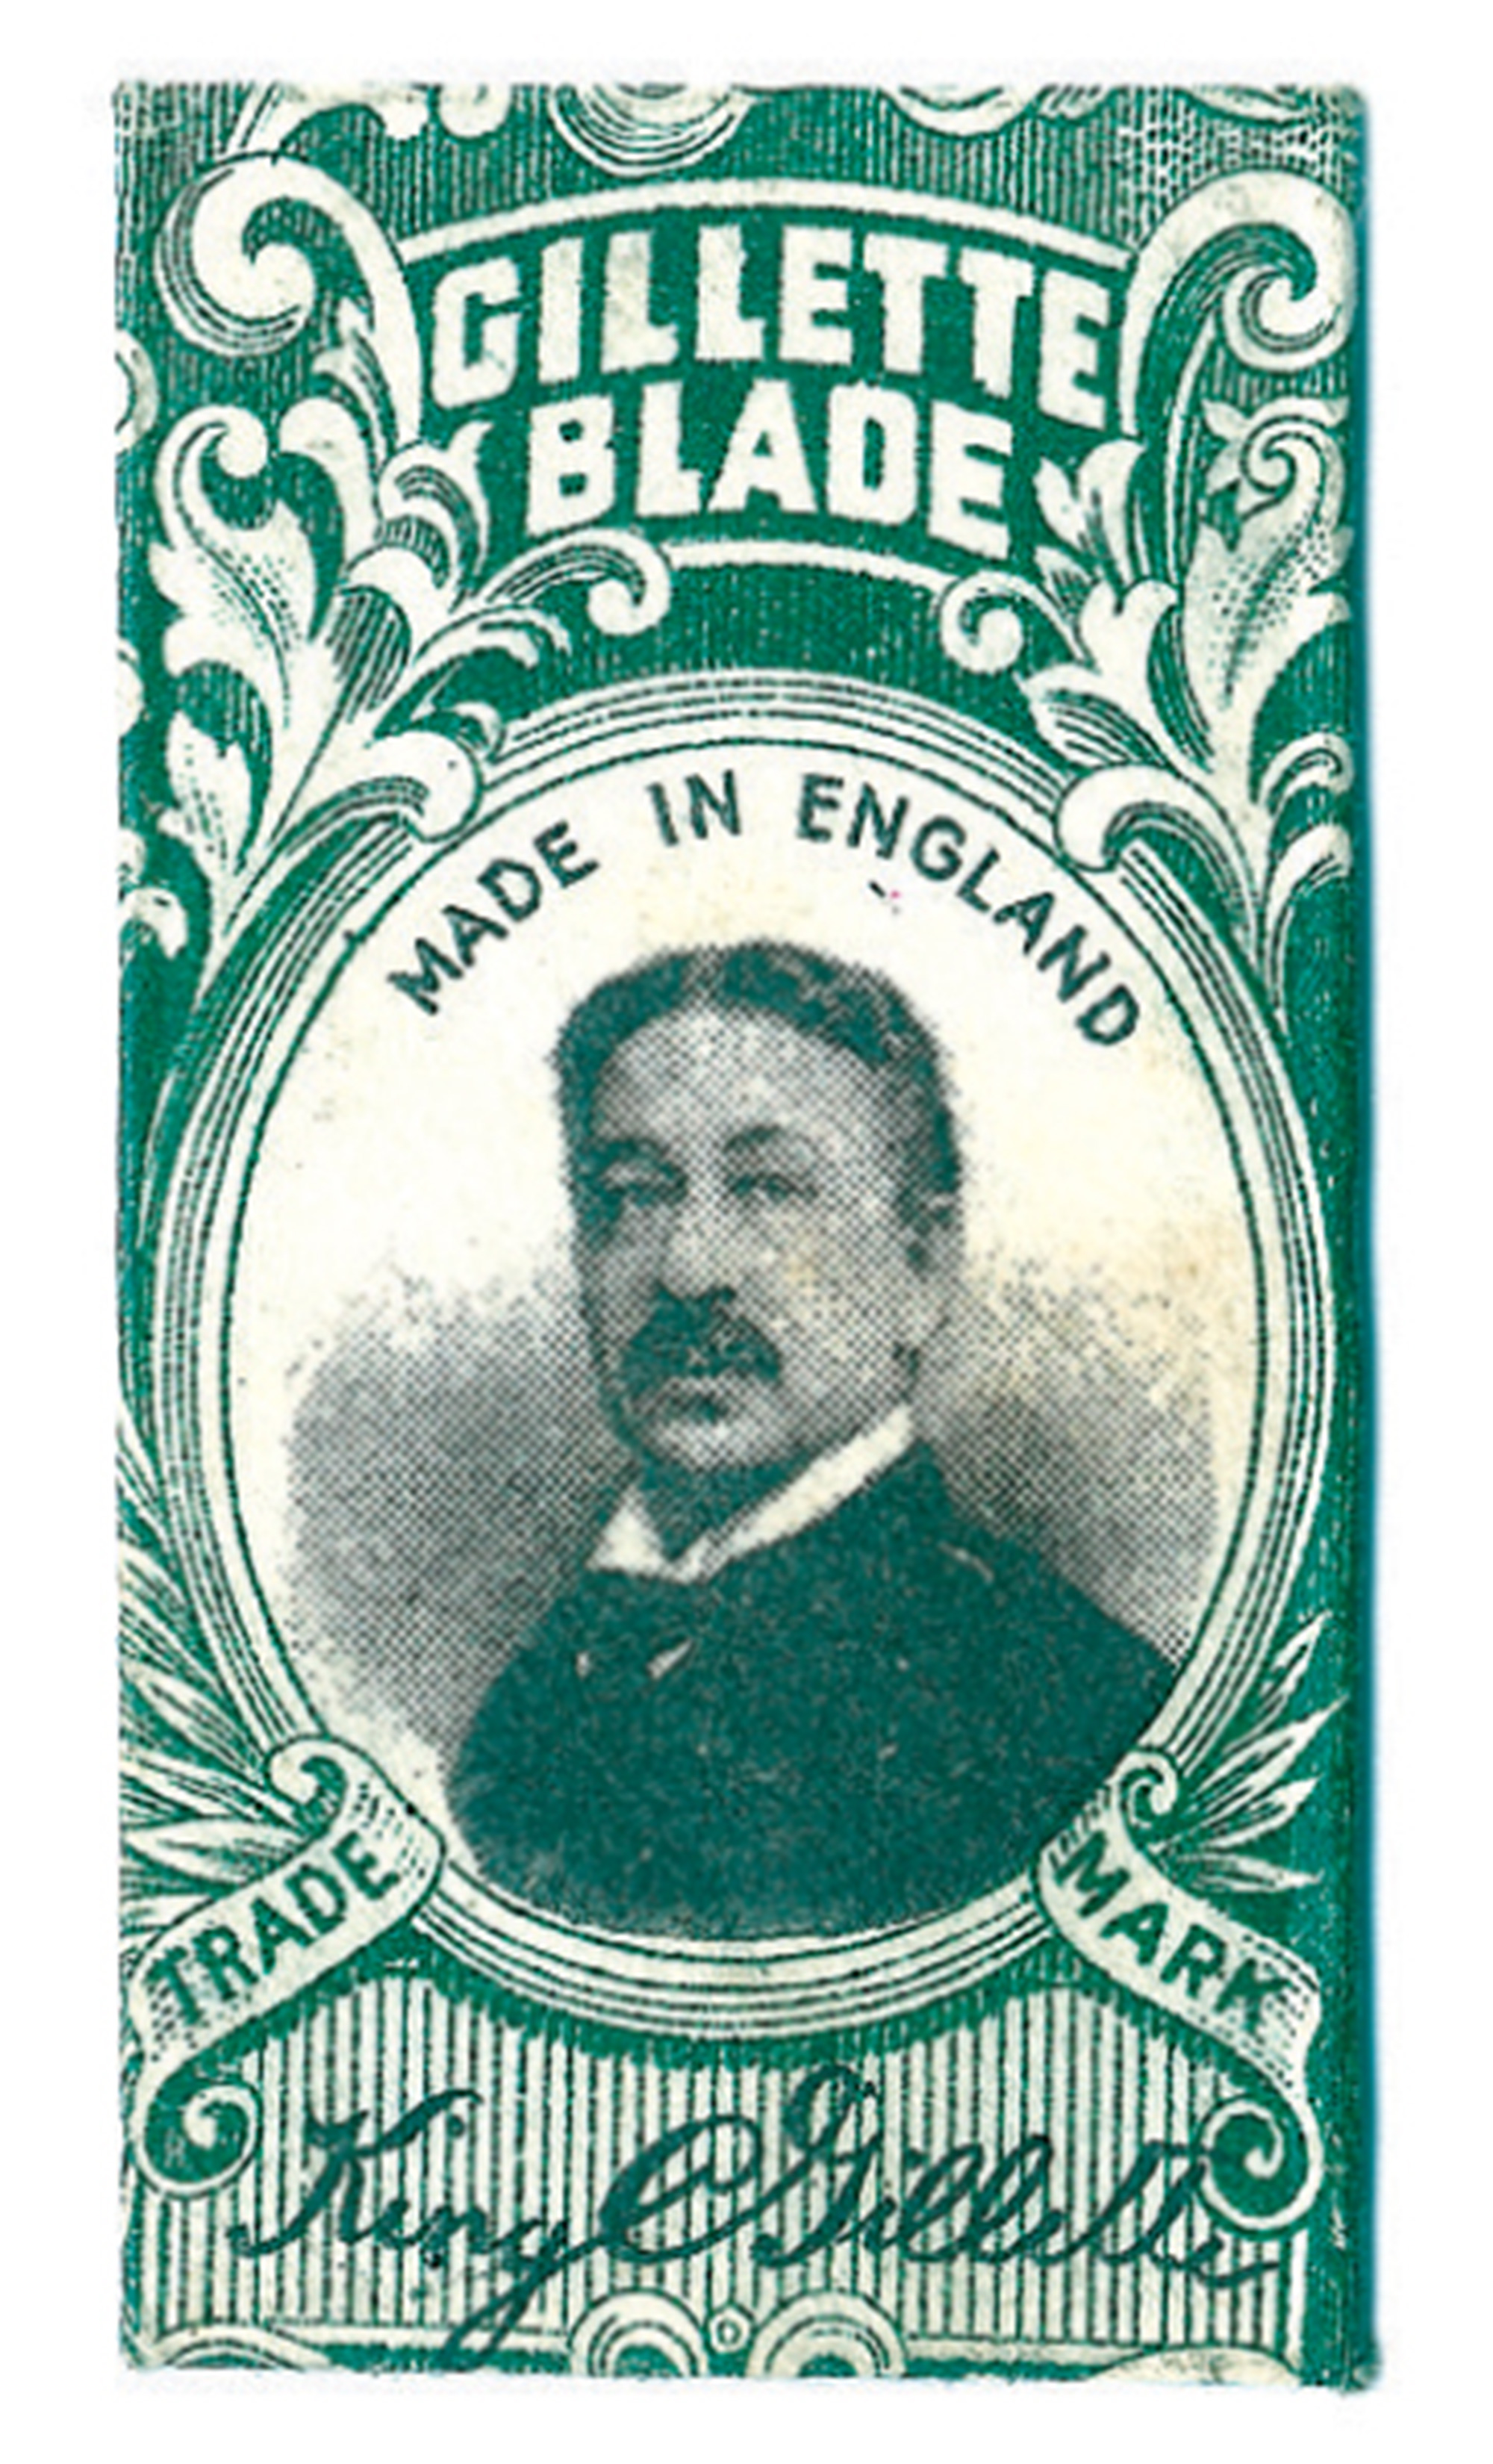 An image of a Gillette razor wrapper from the early twentieth century depicting a portrait of Gillette’s inventor, King C. Gillette.